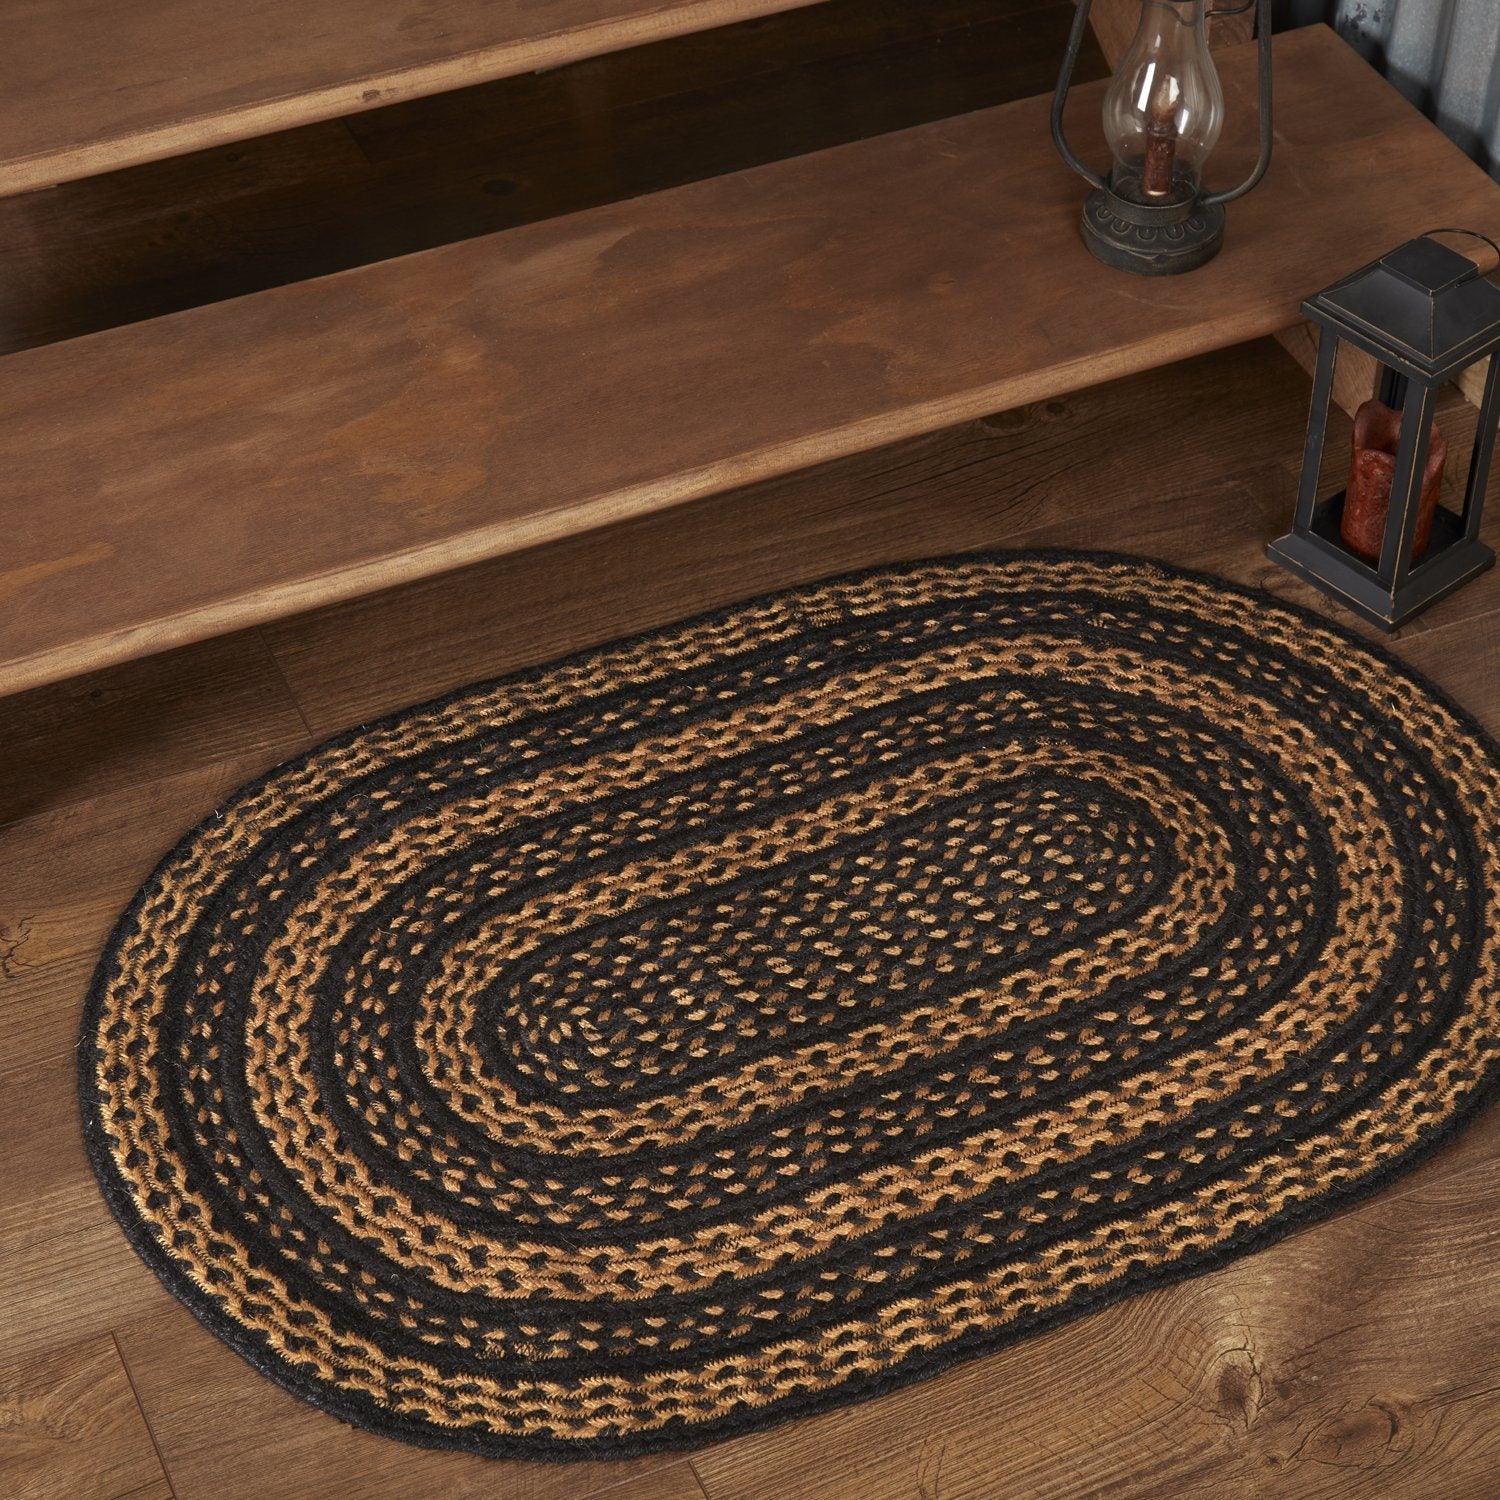 Braided Rugs Oval